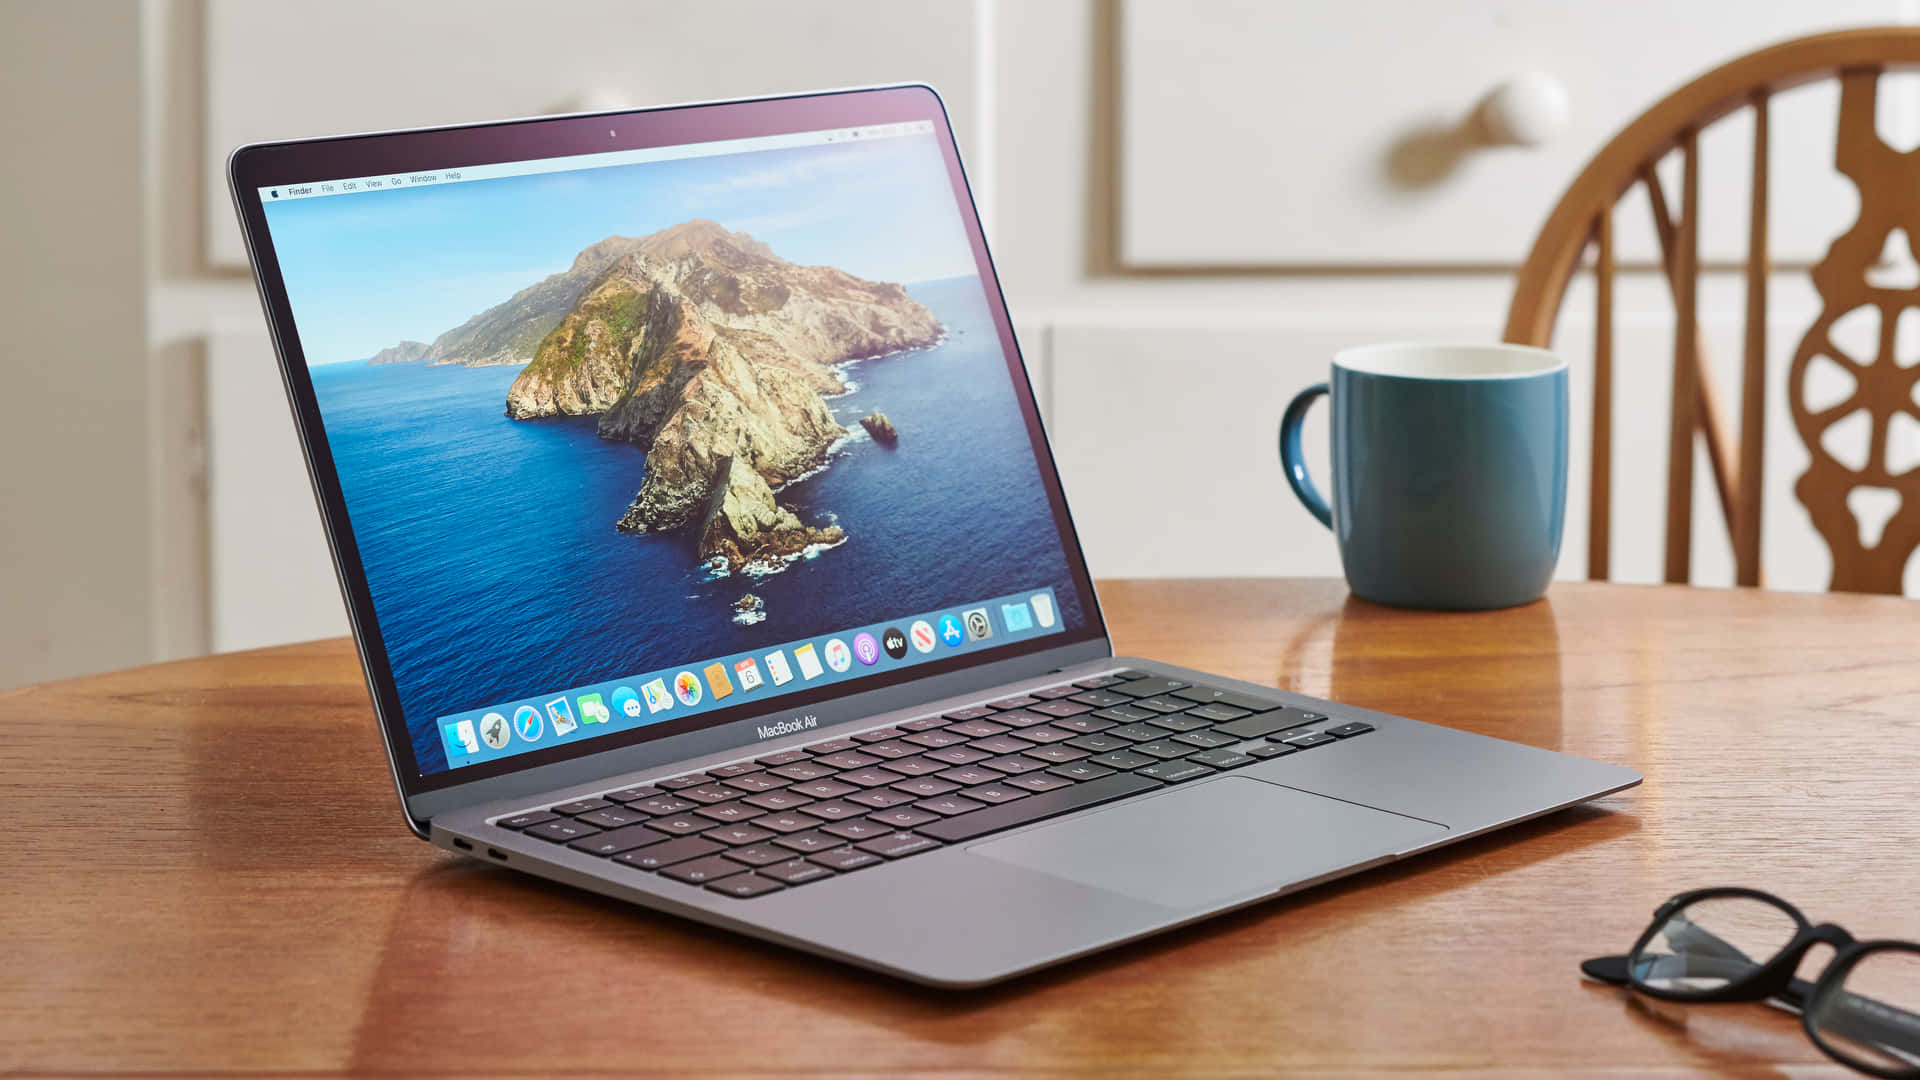 Experience sheer power and portability with the Macbook